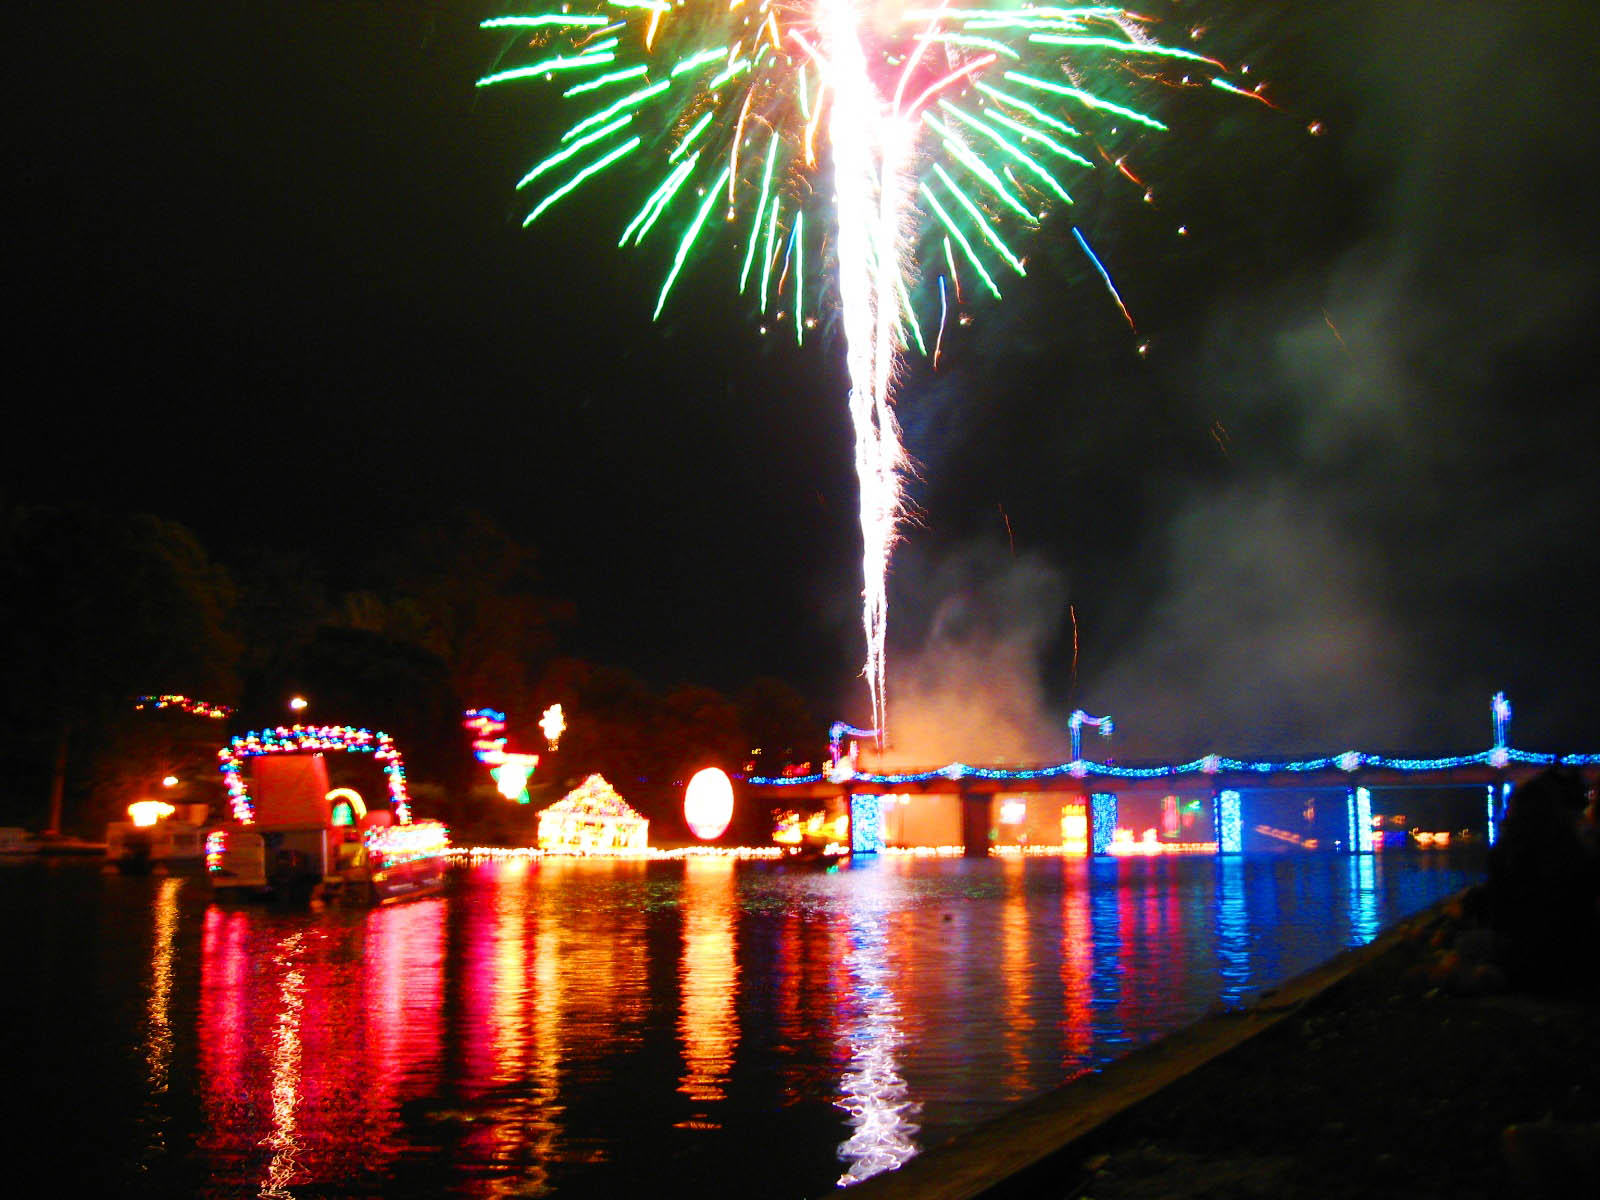 2013 Festival of Lights: Schedule of Events